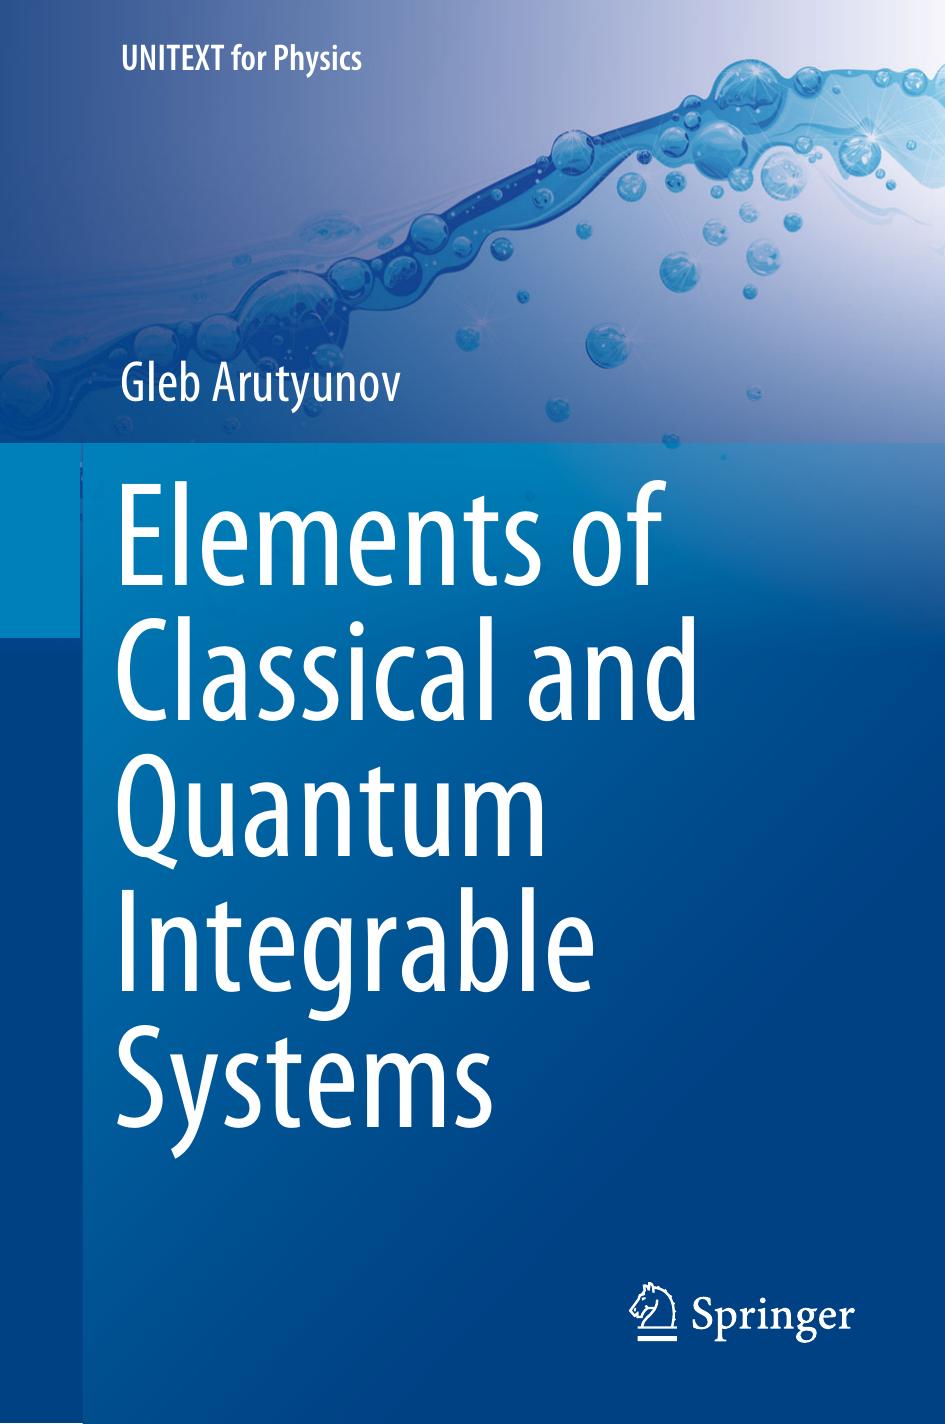 Elements of Classical and Quantum Integrable Systems by Gleb Arutyunov